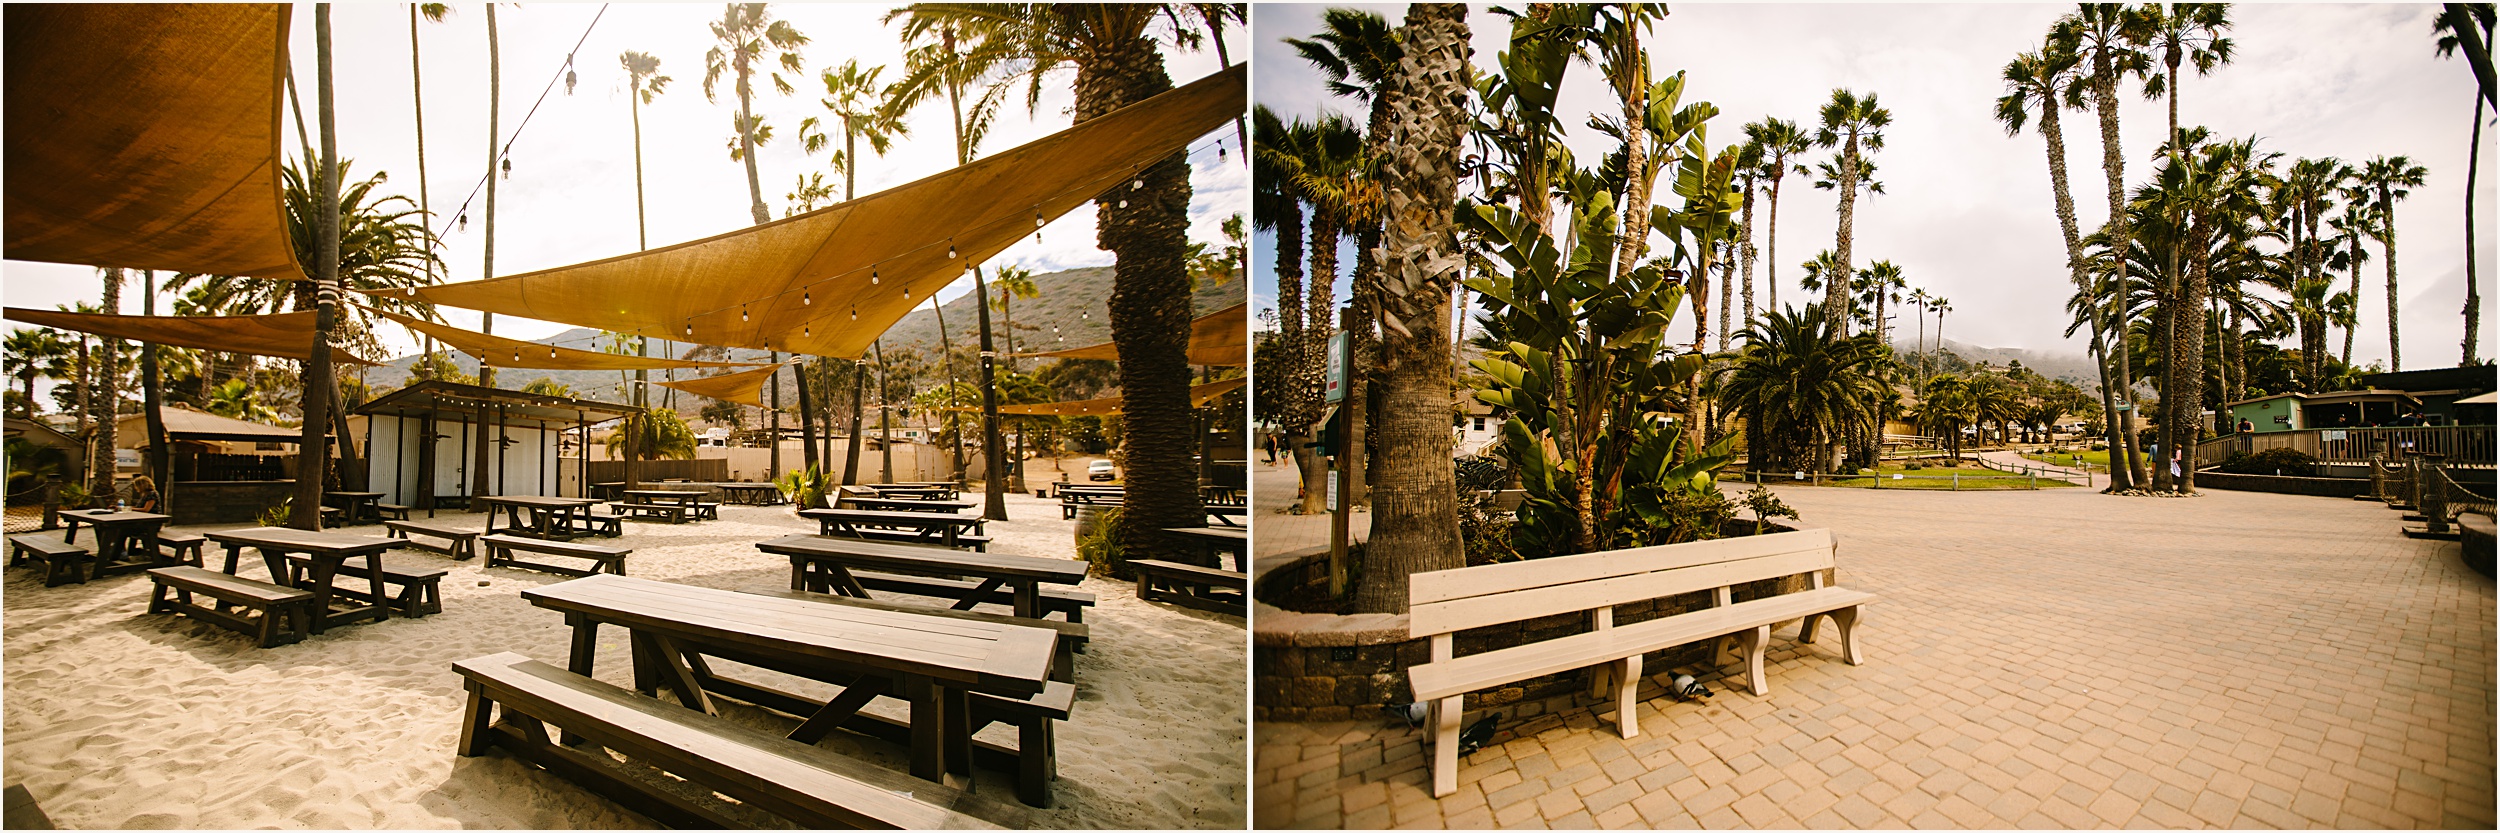 two photos of benches and picnic tables